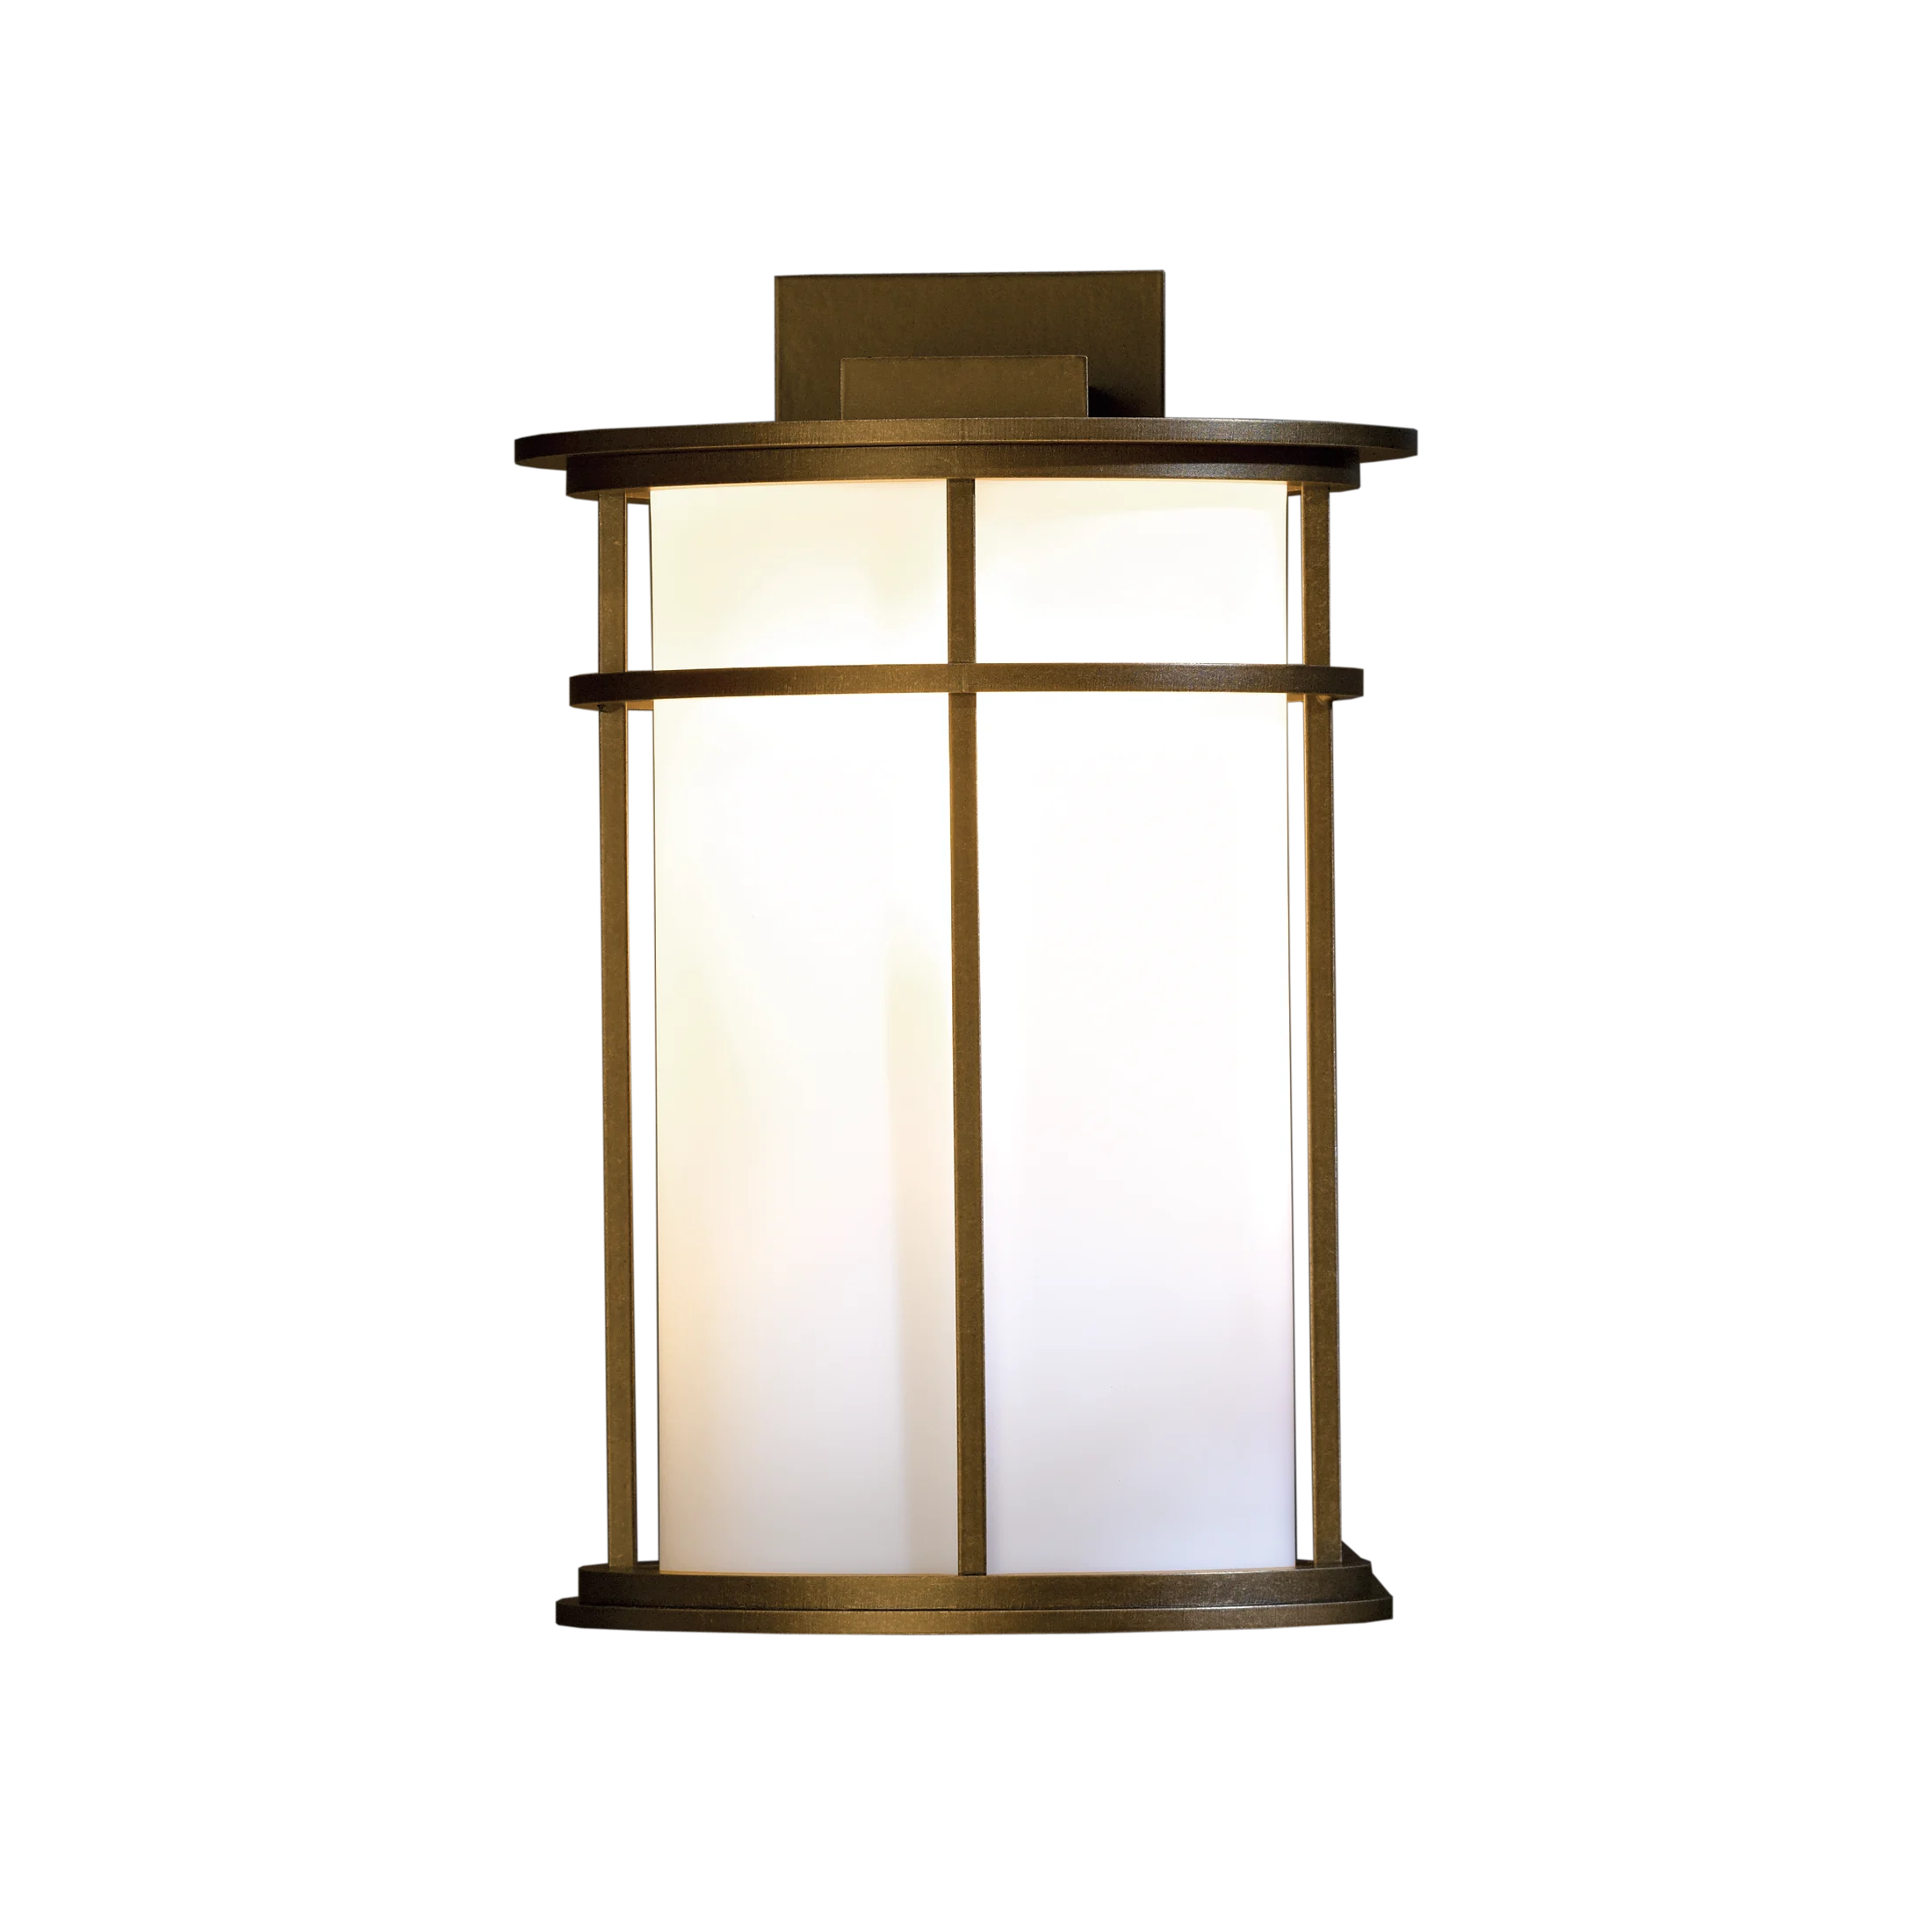 Province Large Outdoor Sconce